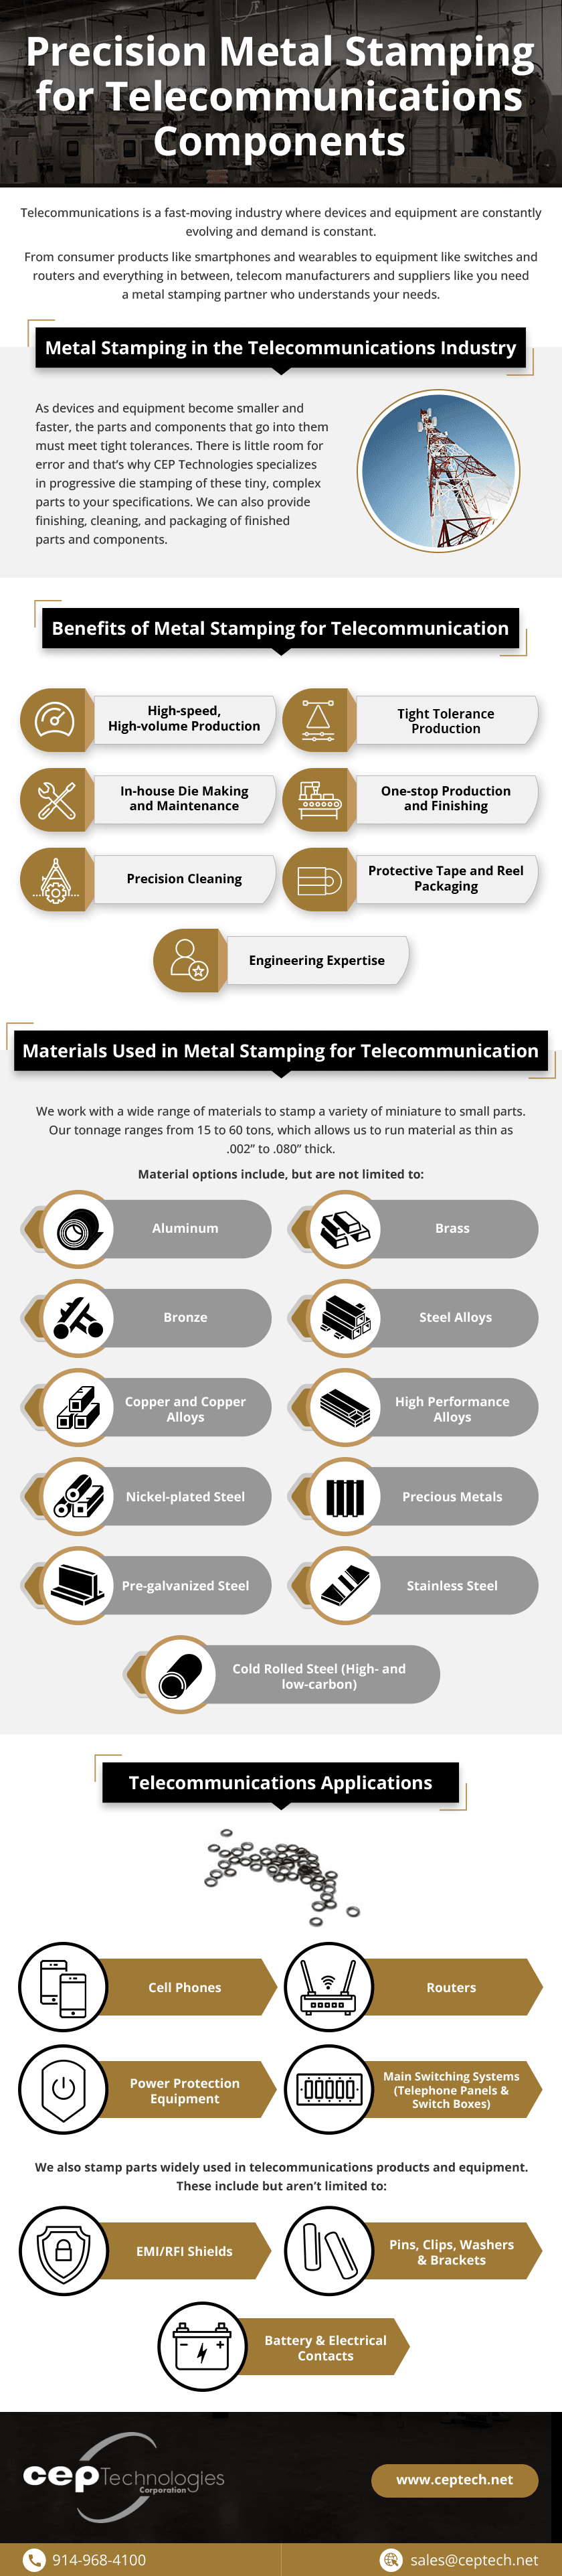 Telecommunications stamping infographic